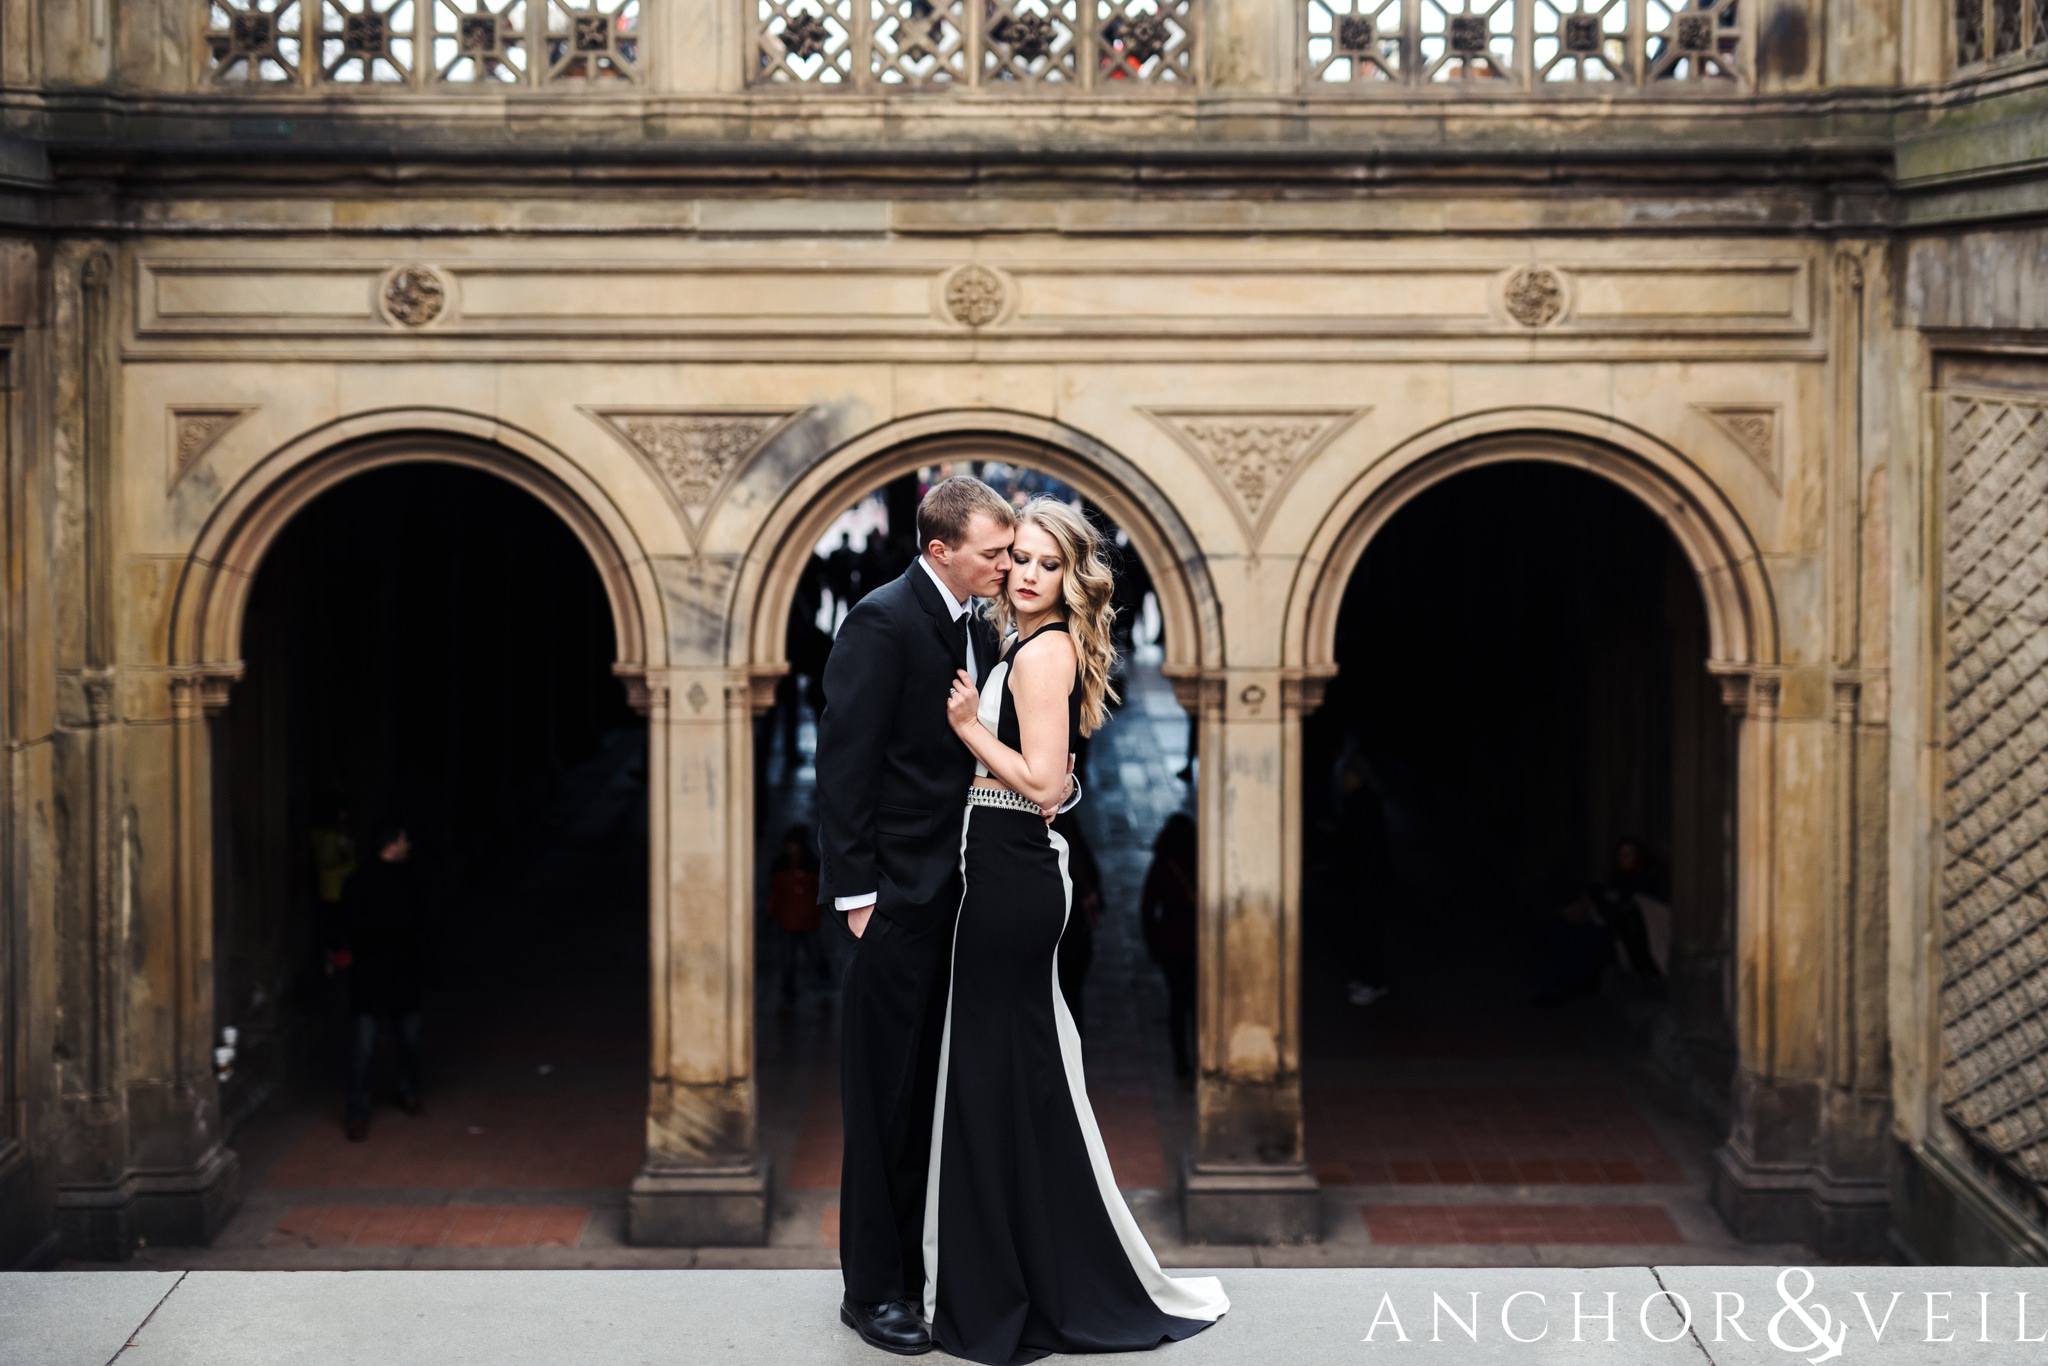 between the arches during their anniversary session